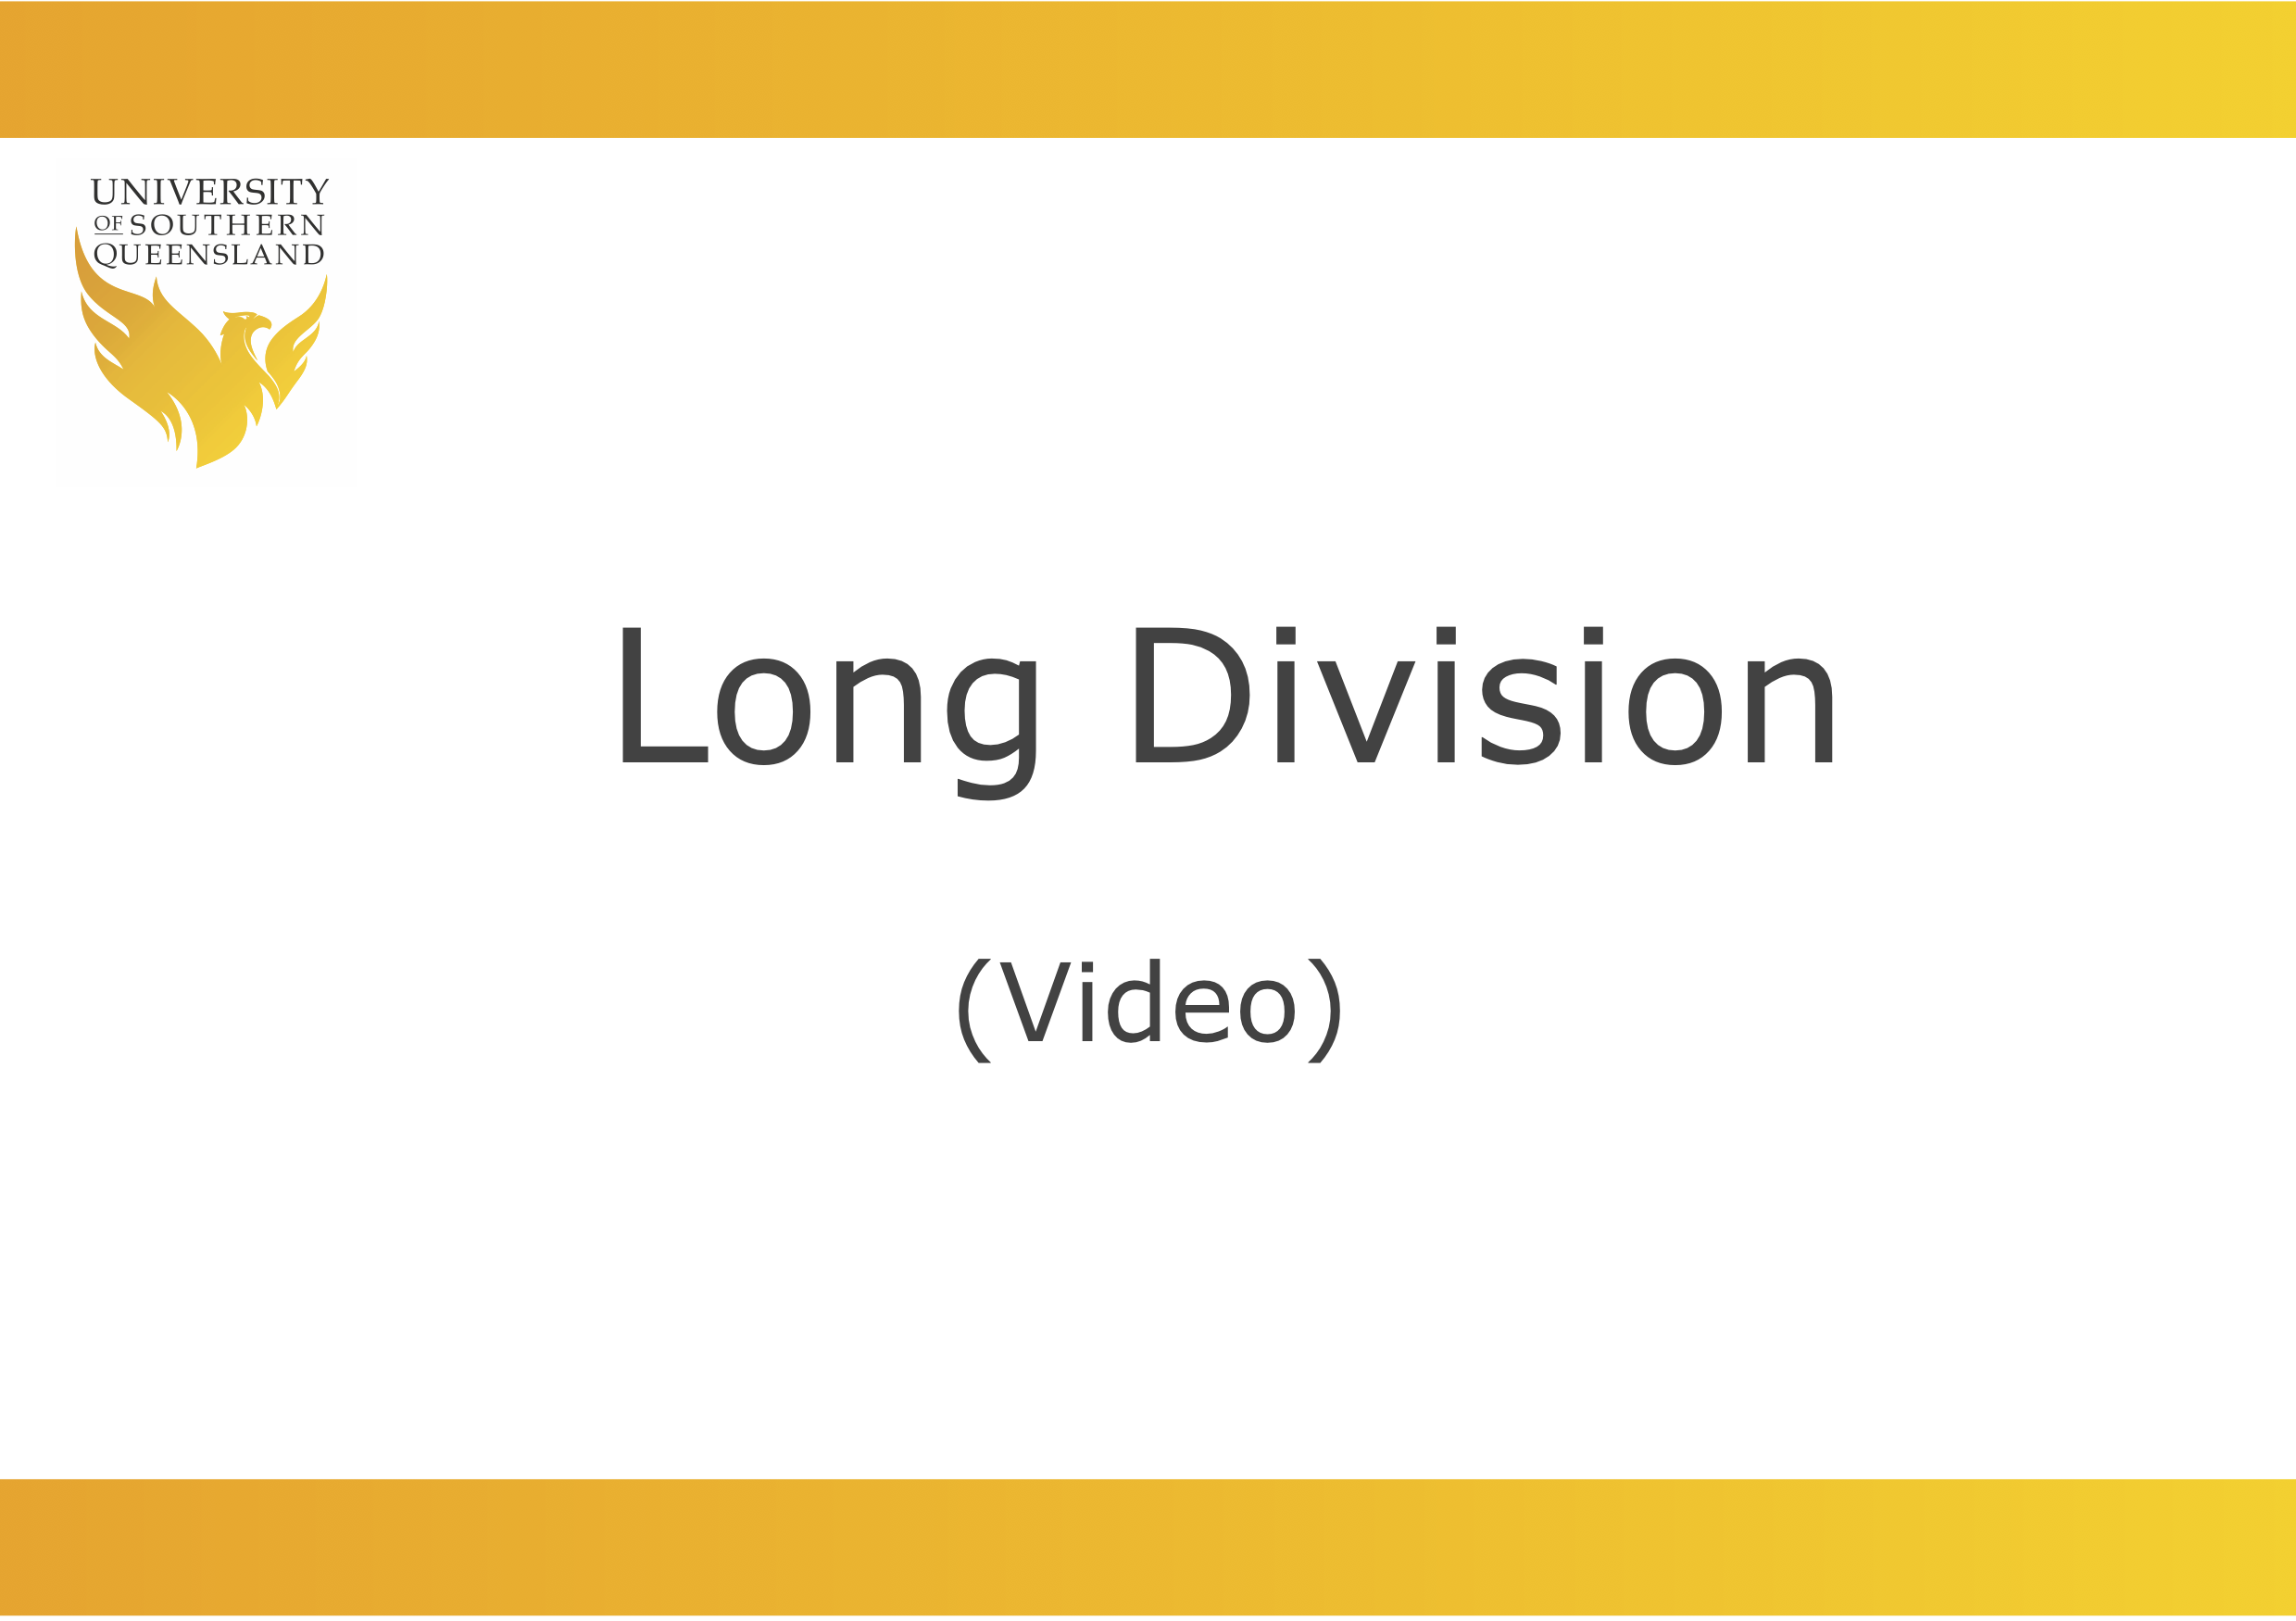 Long Division video